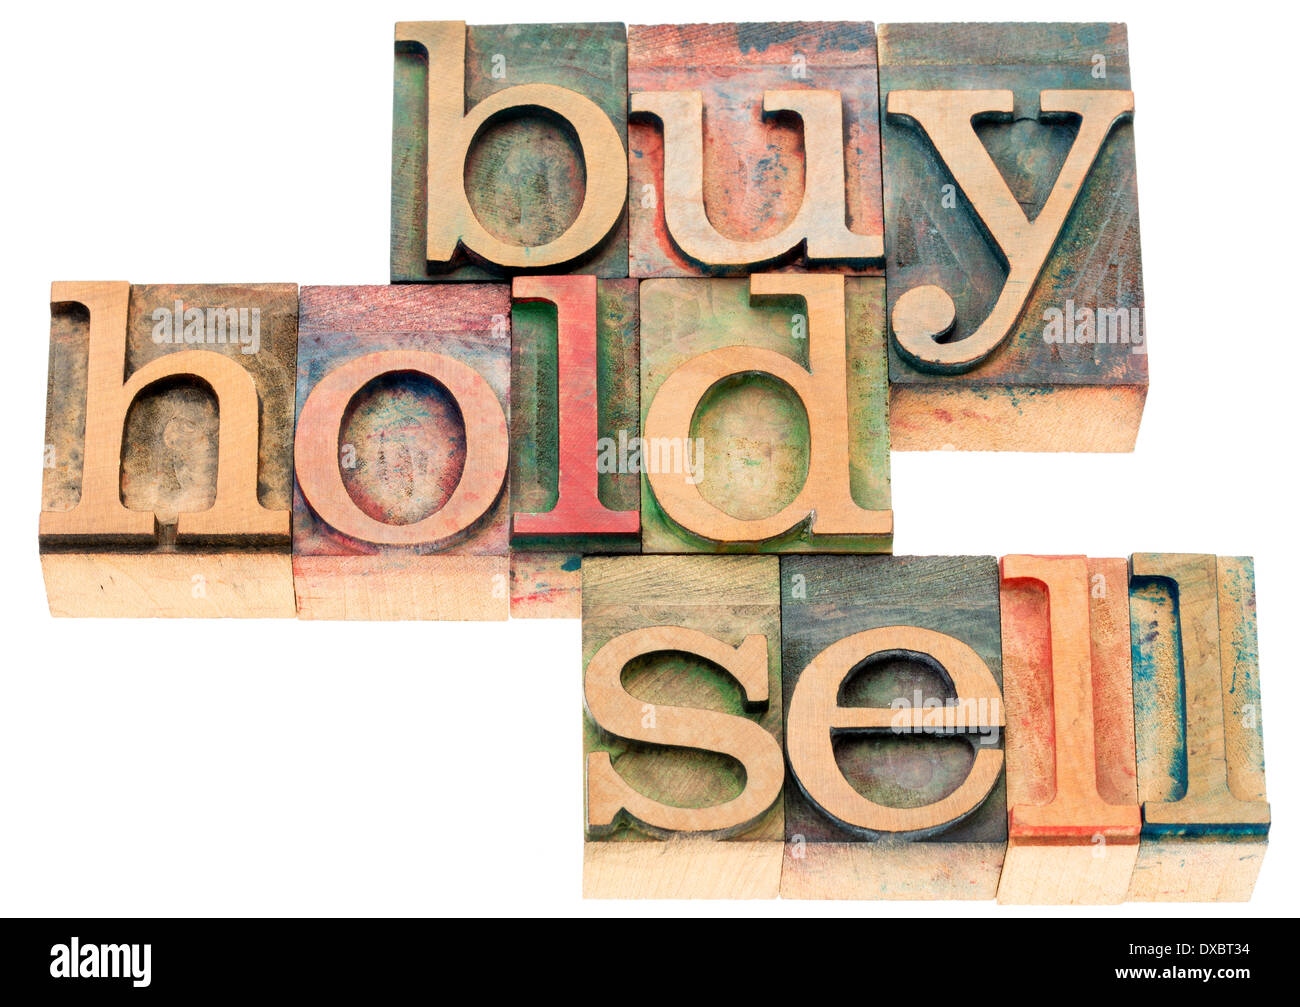 buy, hold, sell - investing concept - isolated text in letterpress wood type printing blocks stained by color inks Stock Photo